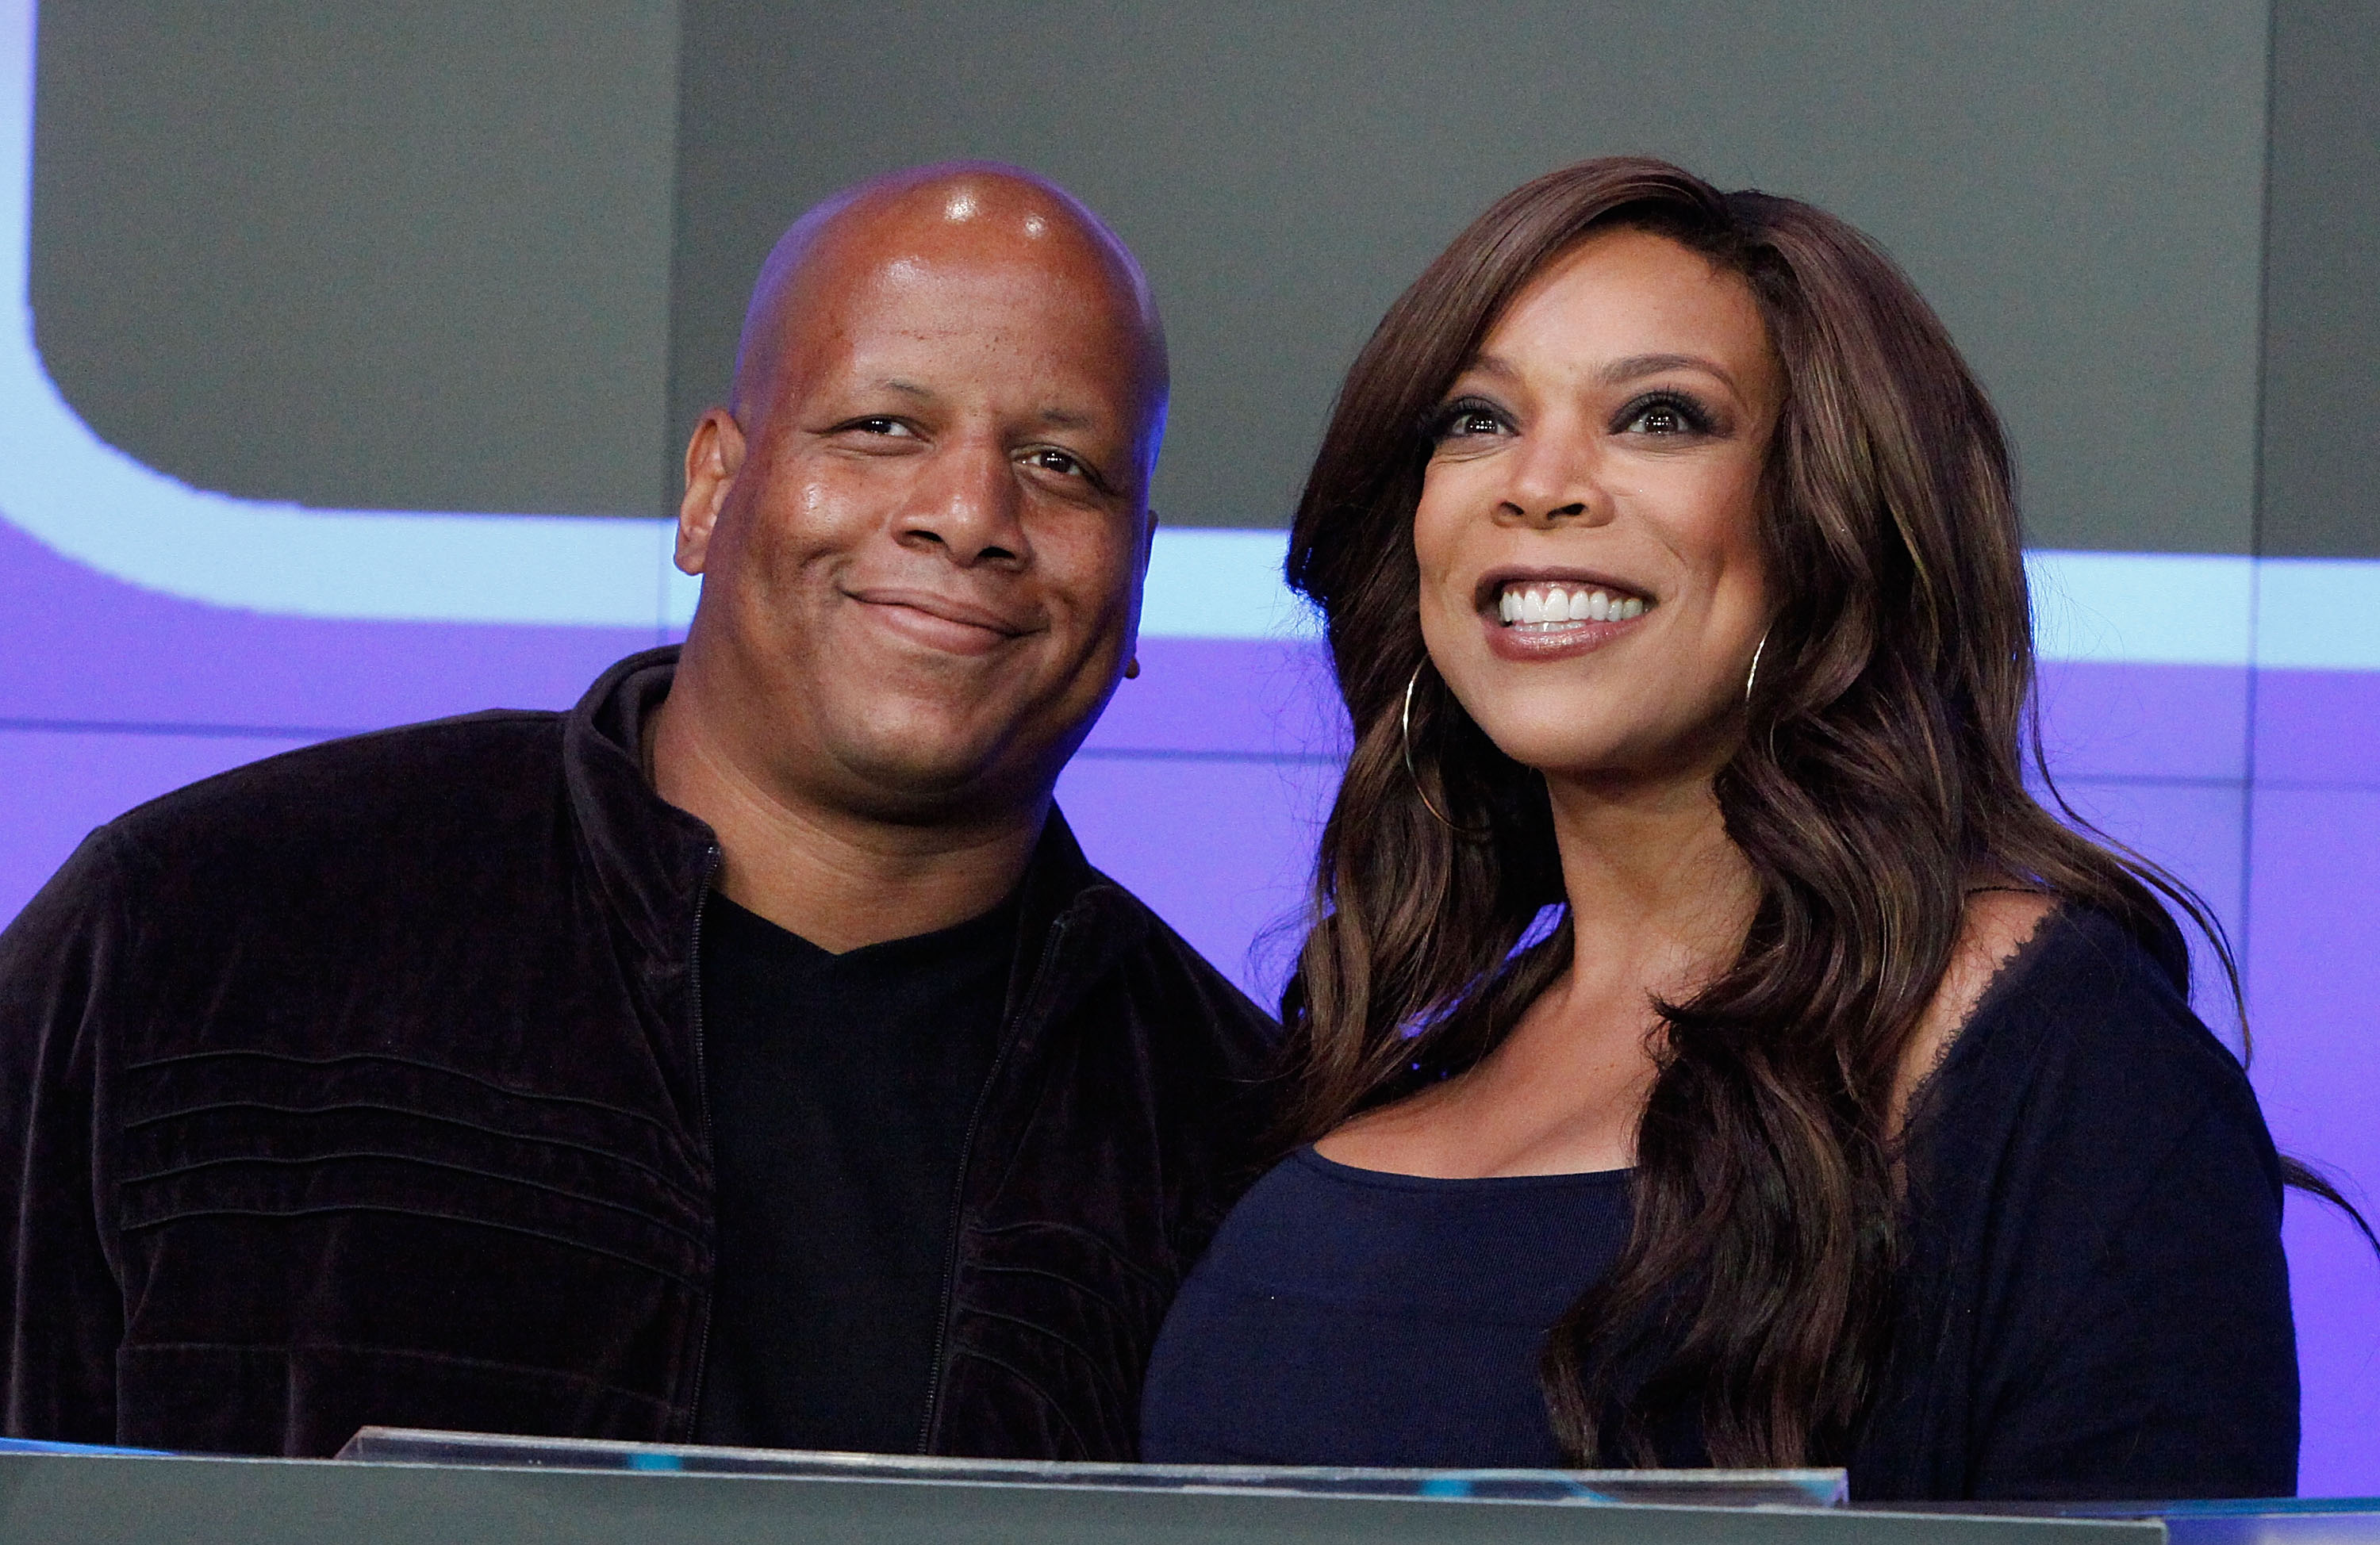 Kevin Hunter and Wendy Williams at the NASDAQ MarketSite on August 25, 2010 | Photo: Getty Images